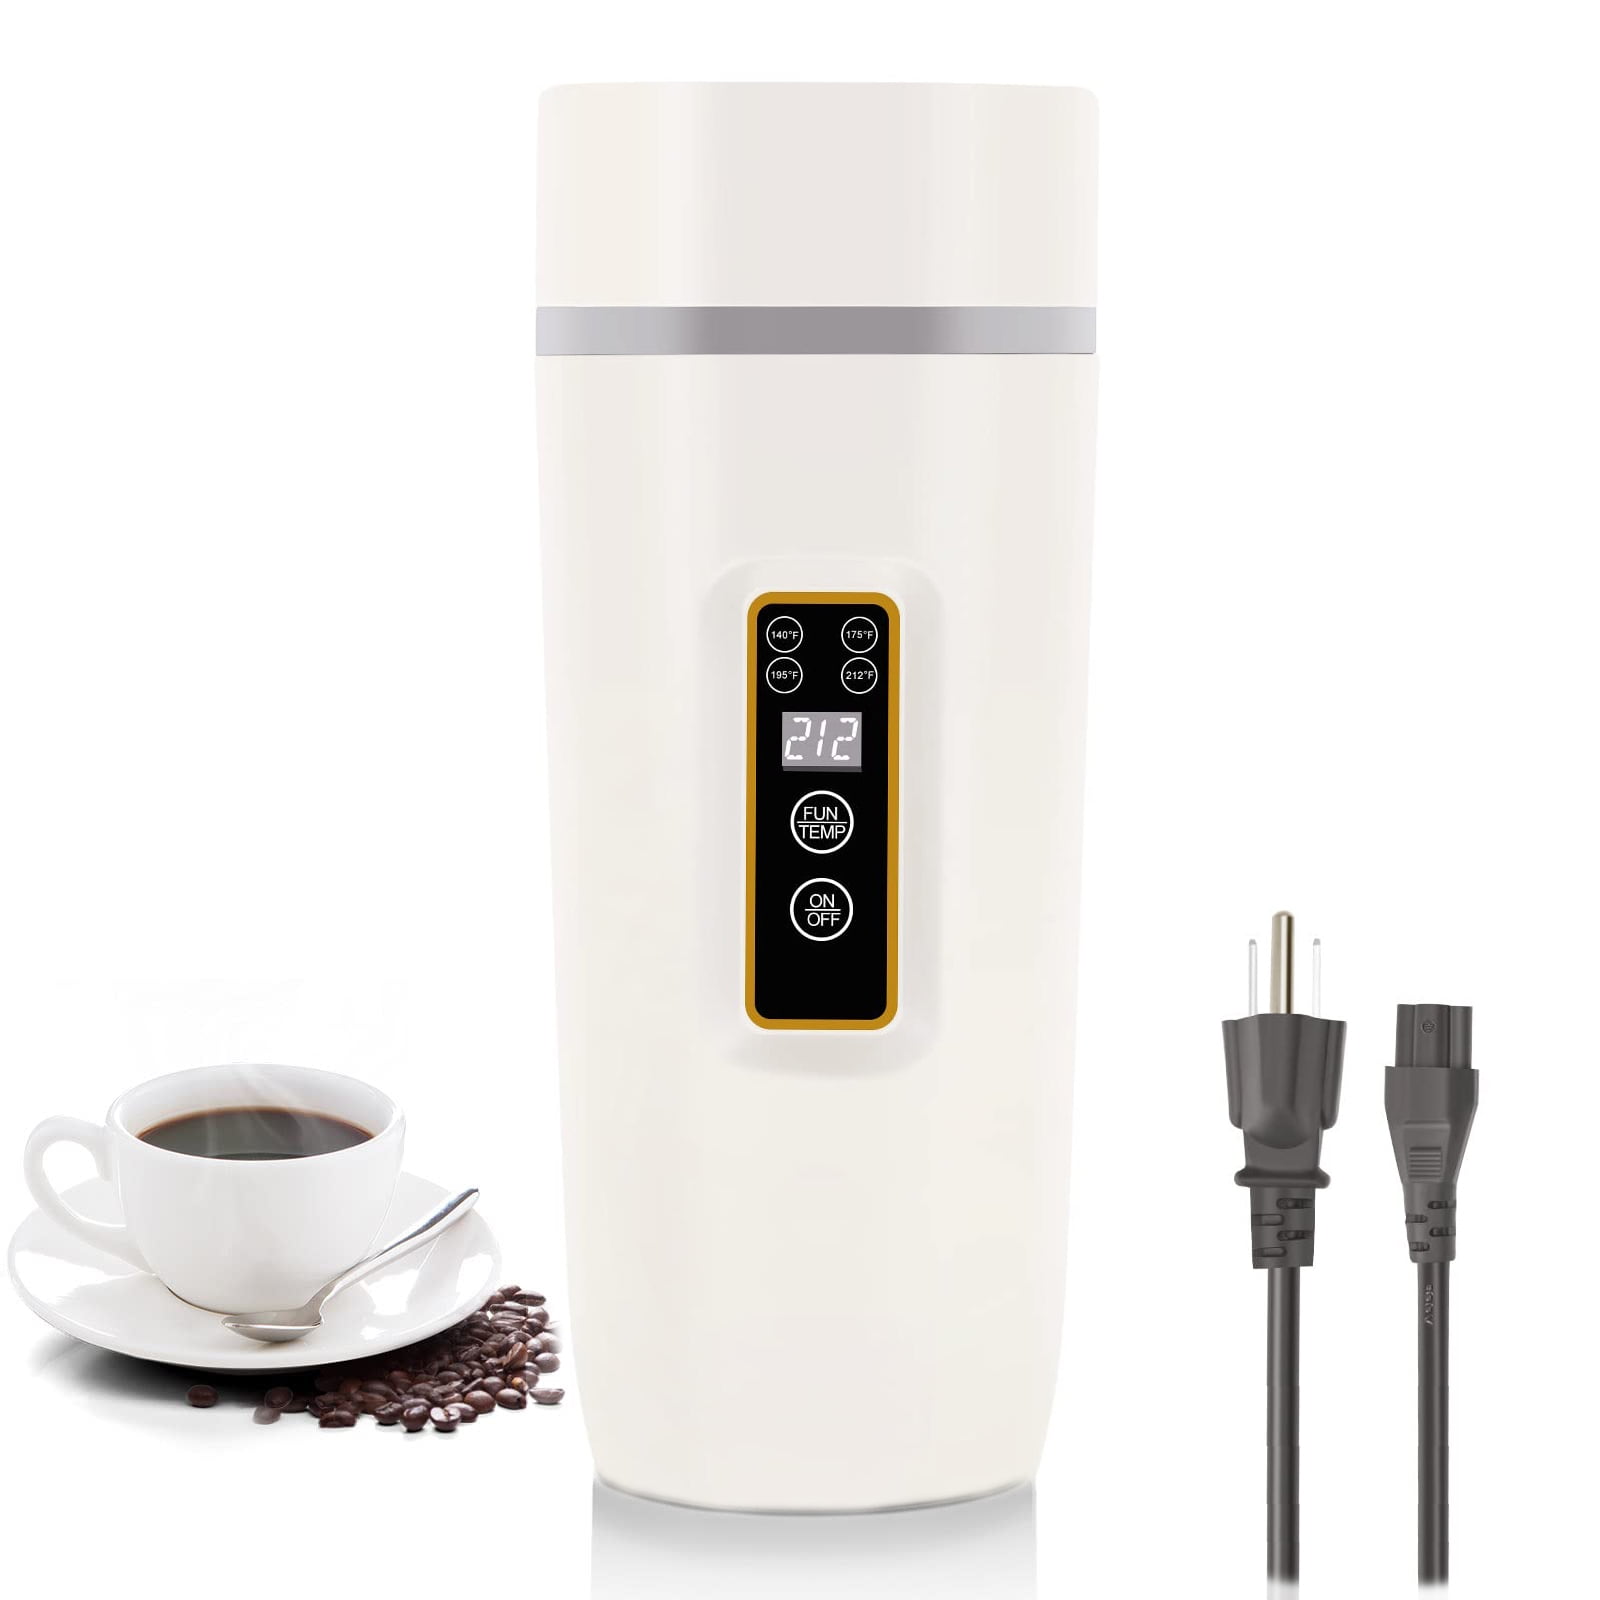 Portable Travel Electric Kettle, 350ml Small Electric Tea Kettle, Mini Portable Hot Water Boiler Stainless Materials Automatic Shut Off and Dry